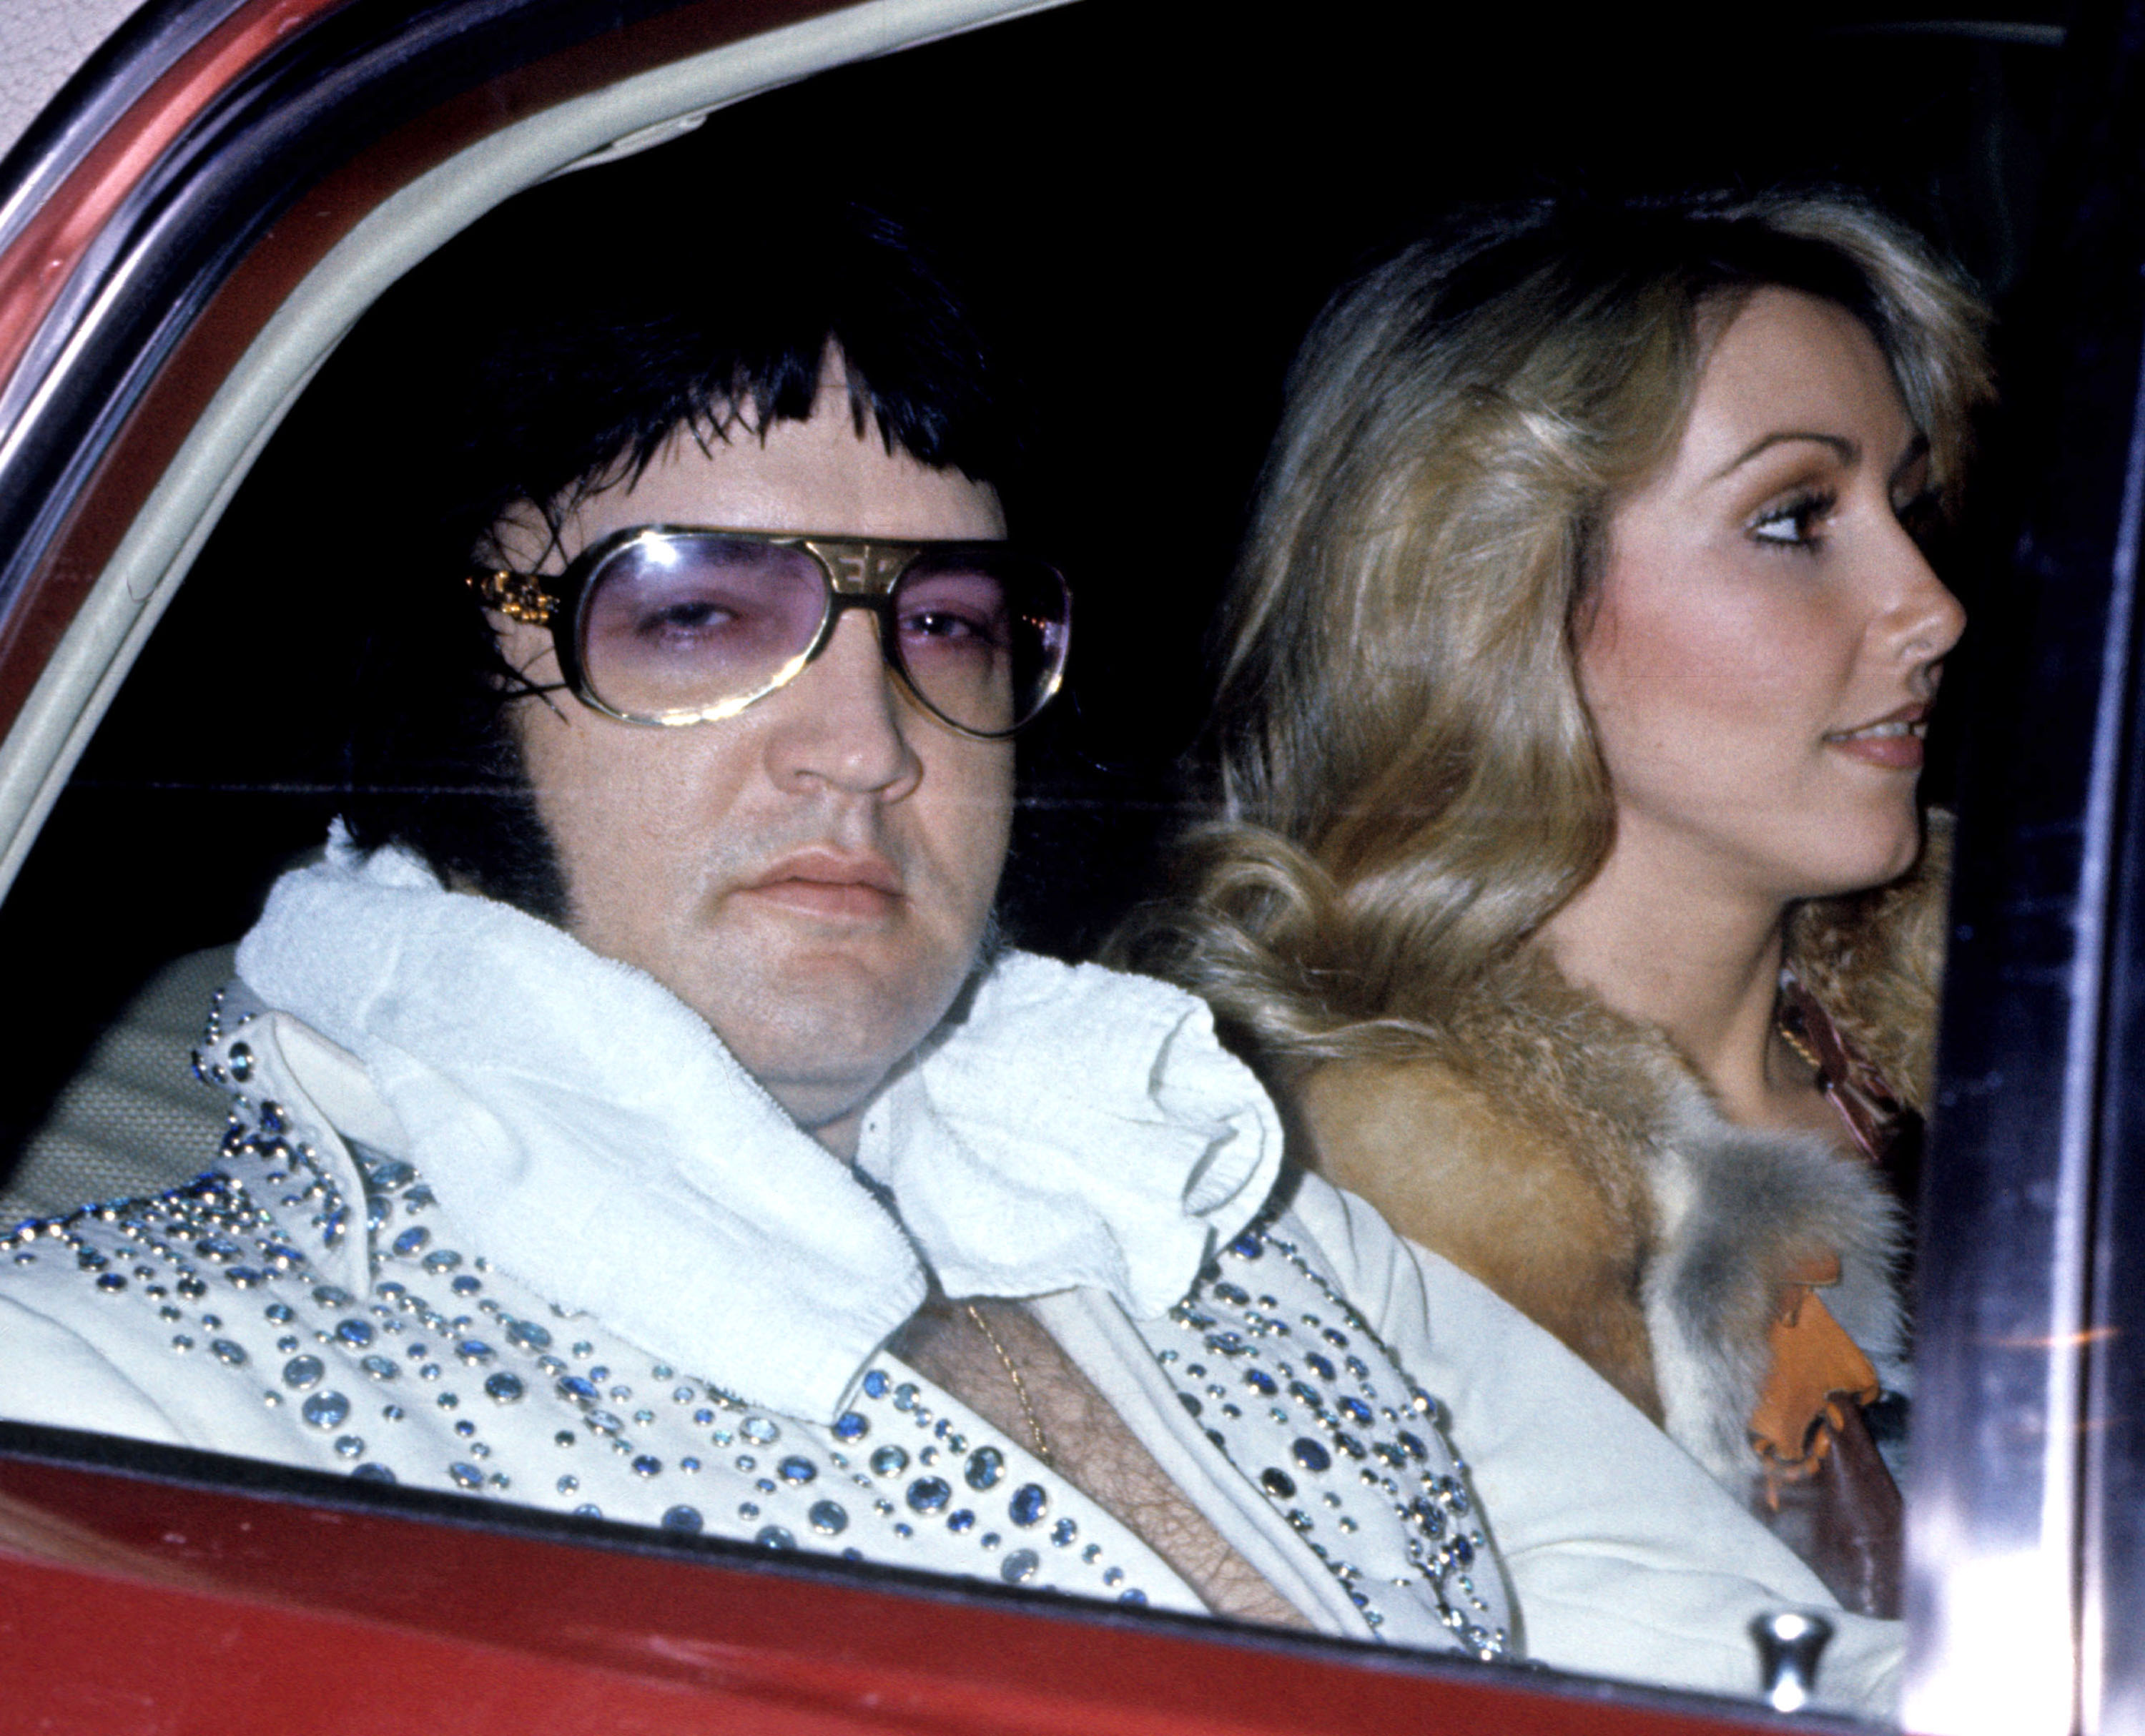 Elvis Presley and Linda Thompson arriving at the Hilton hotel in Cincinnati, 1976 | Source: Getty Images